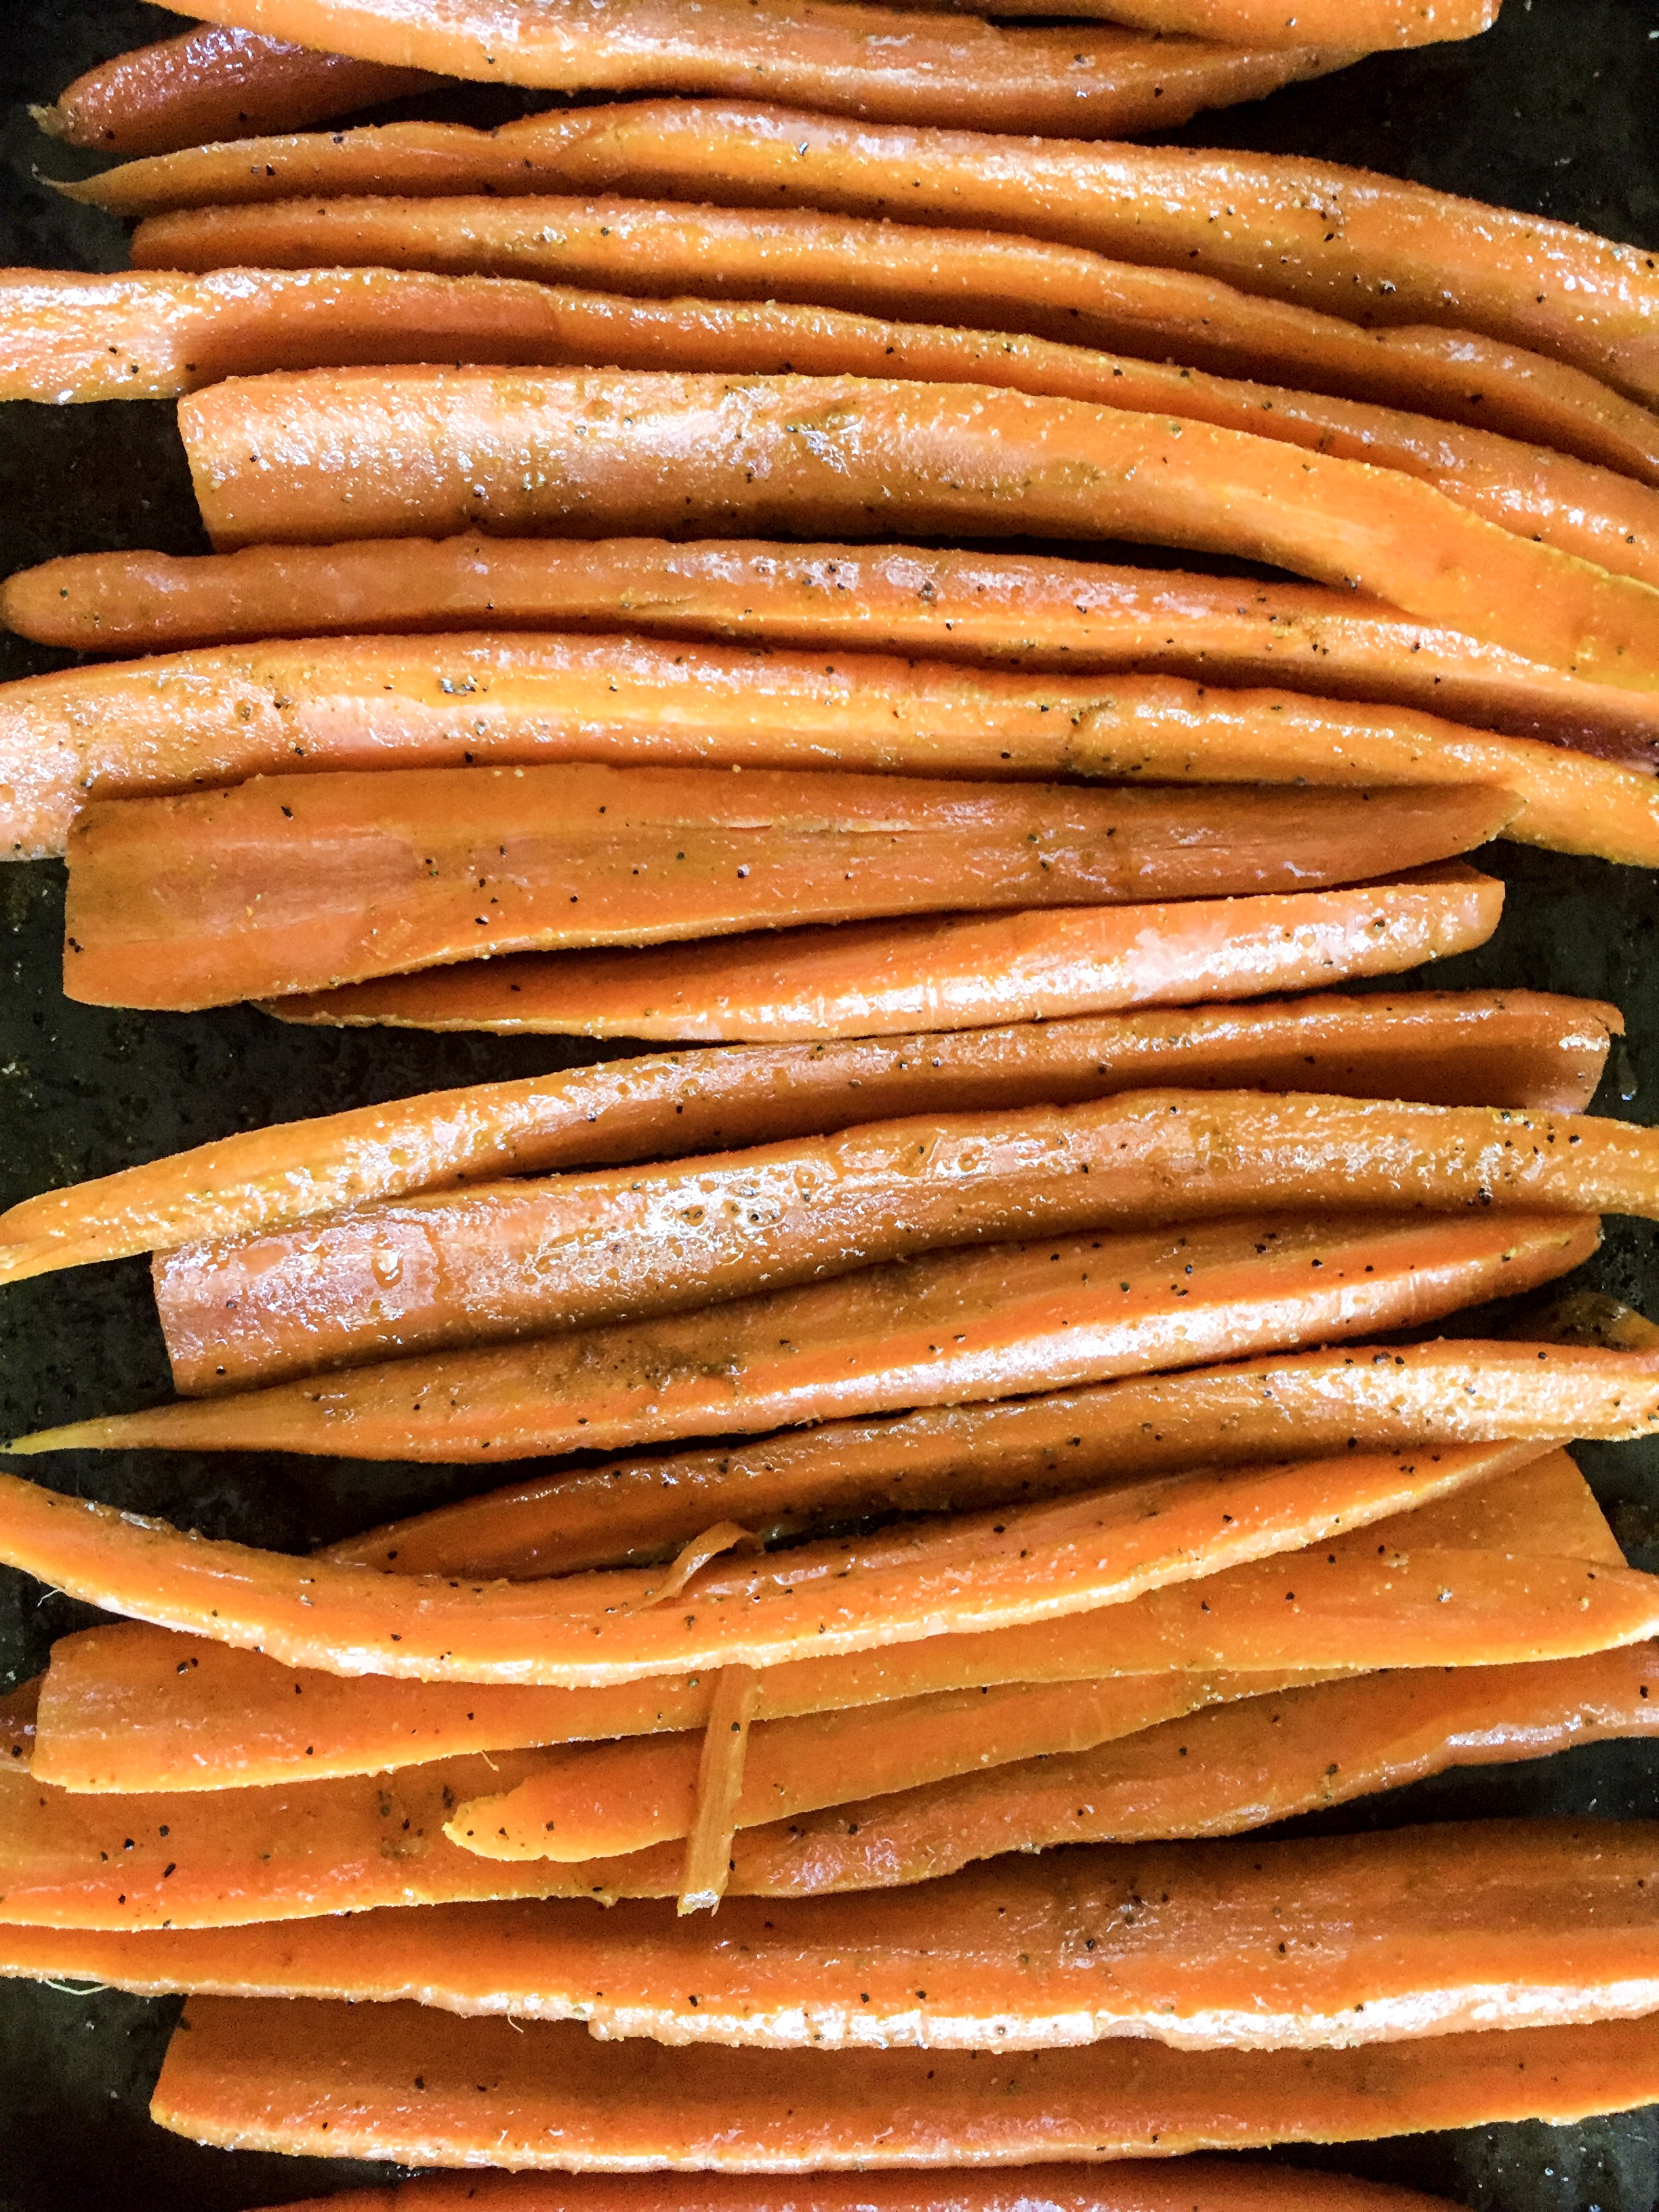 carrots tossed with olive oil and rubbed with powdered ginger and curry powder.